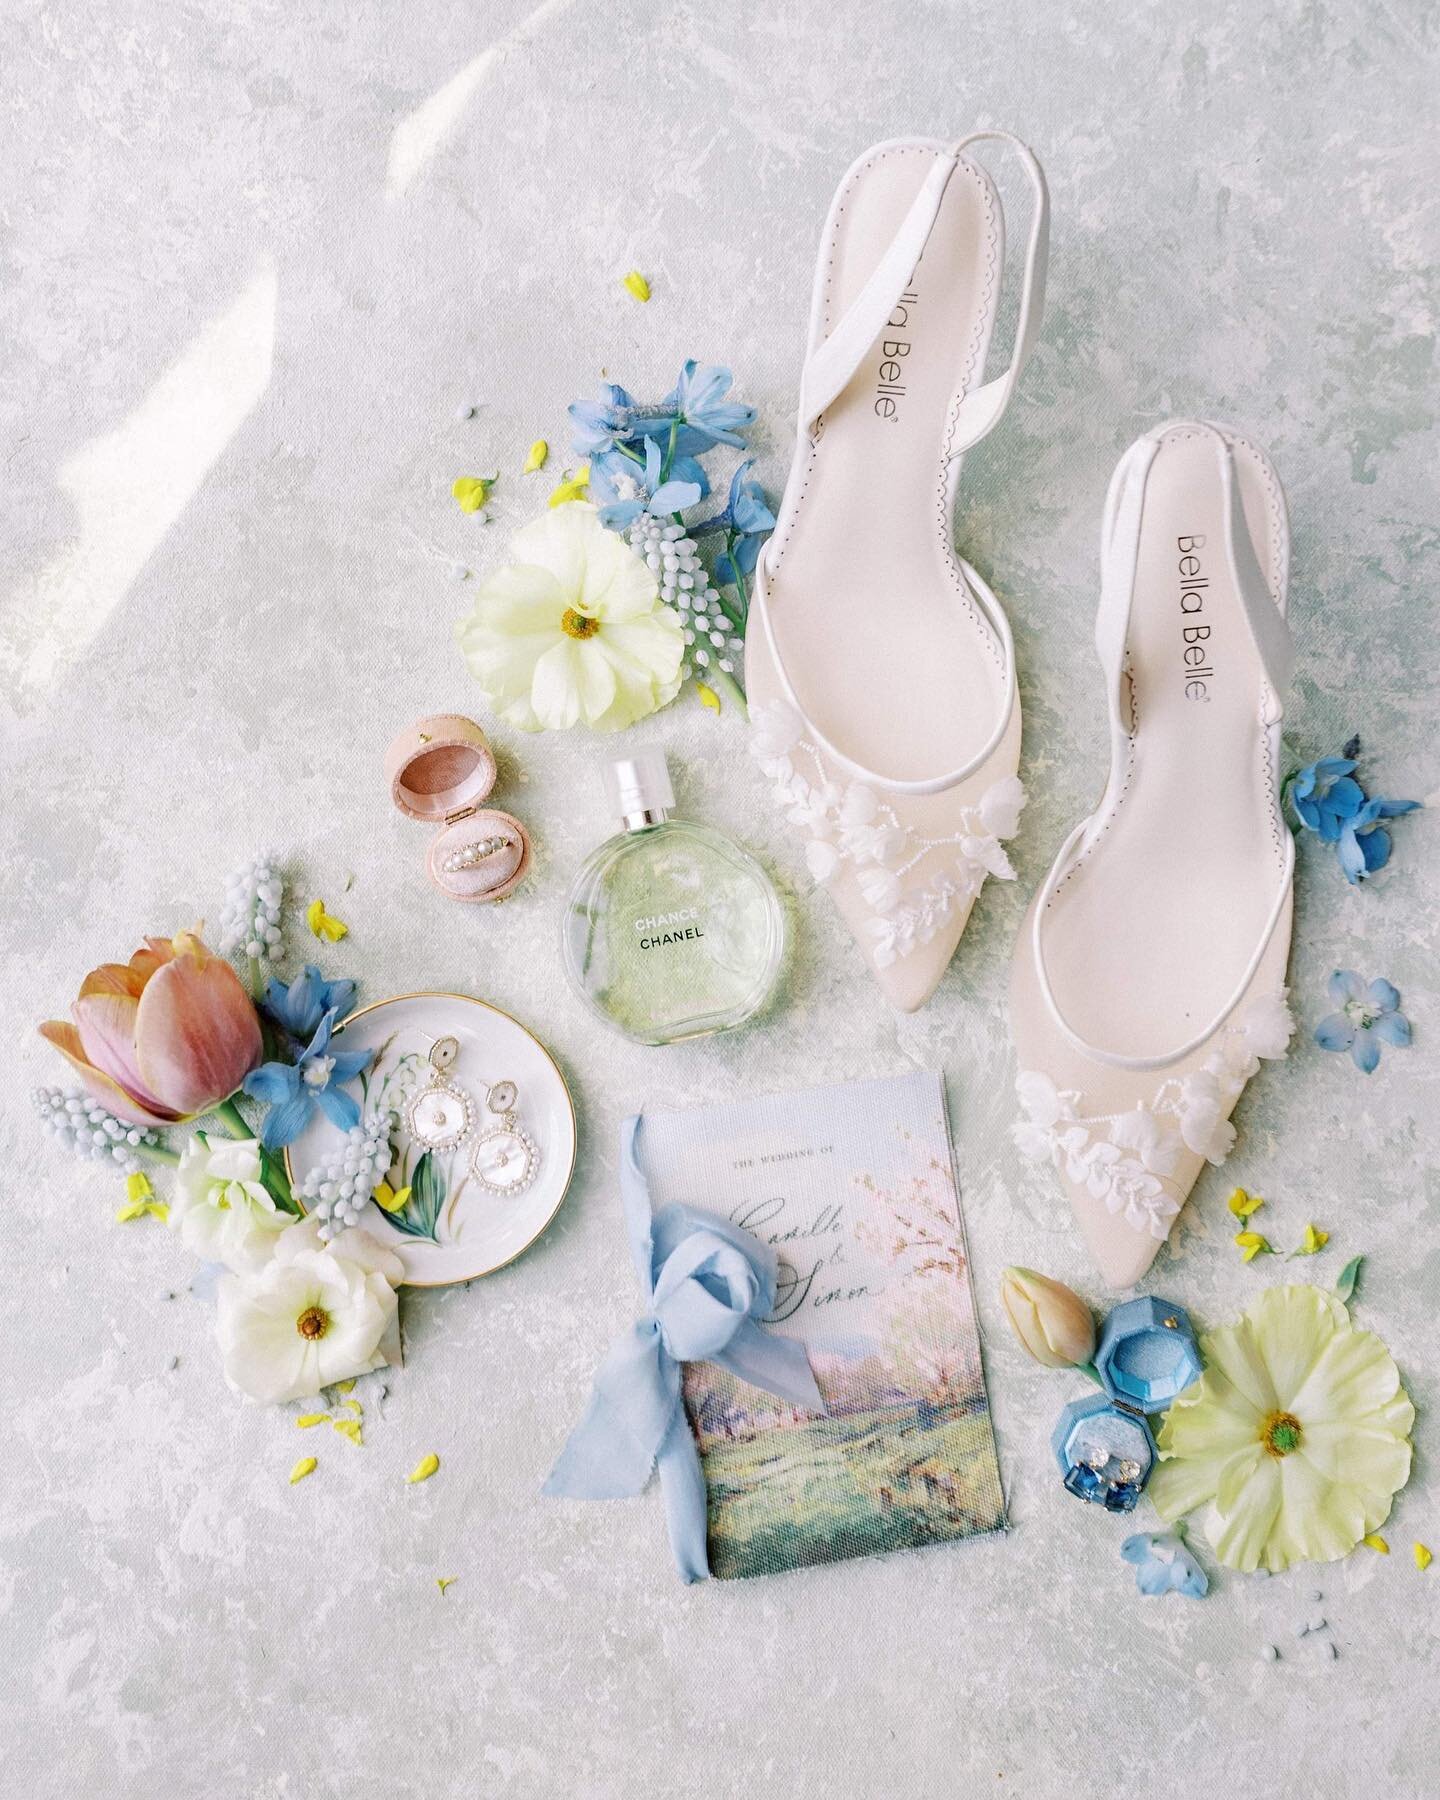 Most beautiful spring flatlay with stationery from @lauraelizabethpatrick and @bellabelleshoes shoes 🌸📝
Venue: Chateau de le Gaude @chateaudelagaude 🎠

Creative team: 
Wedding Planning, Styling &amp; Design: AMV Weddings @amv_weddings AMV Retreats